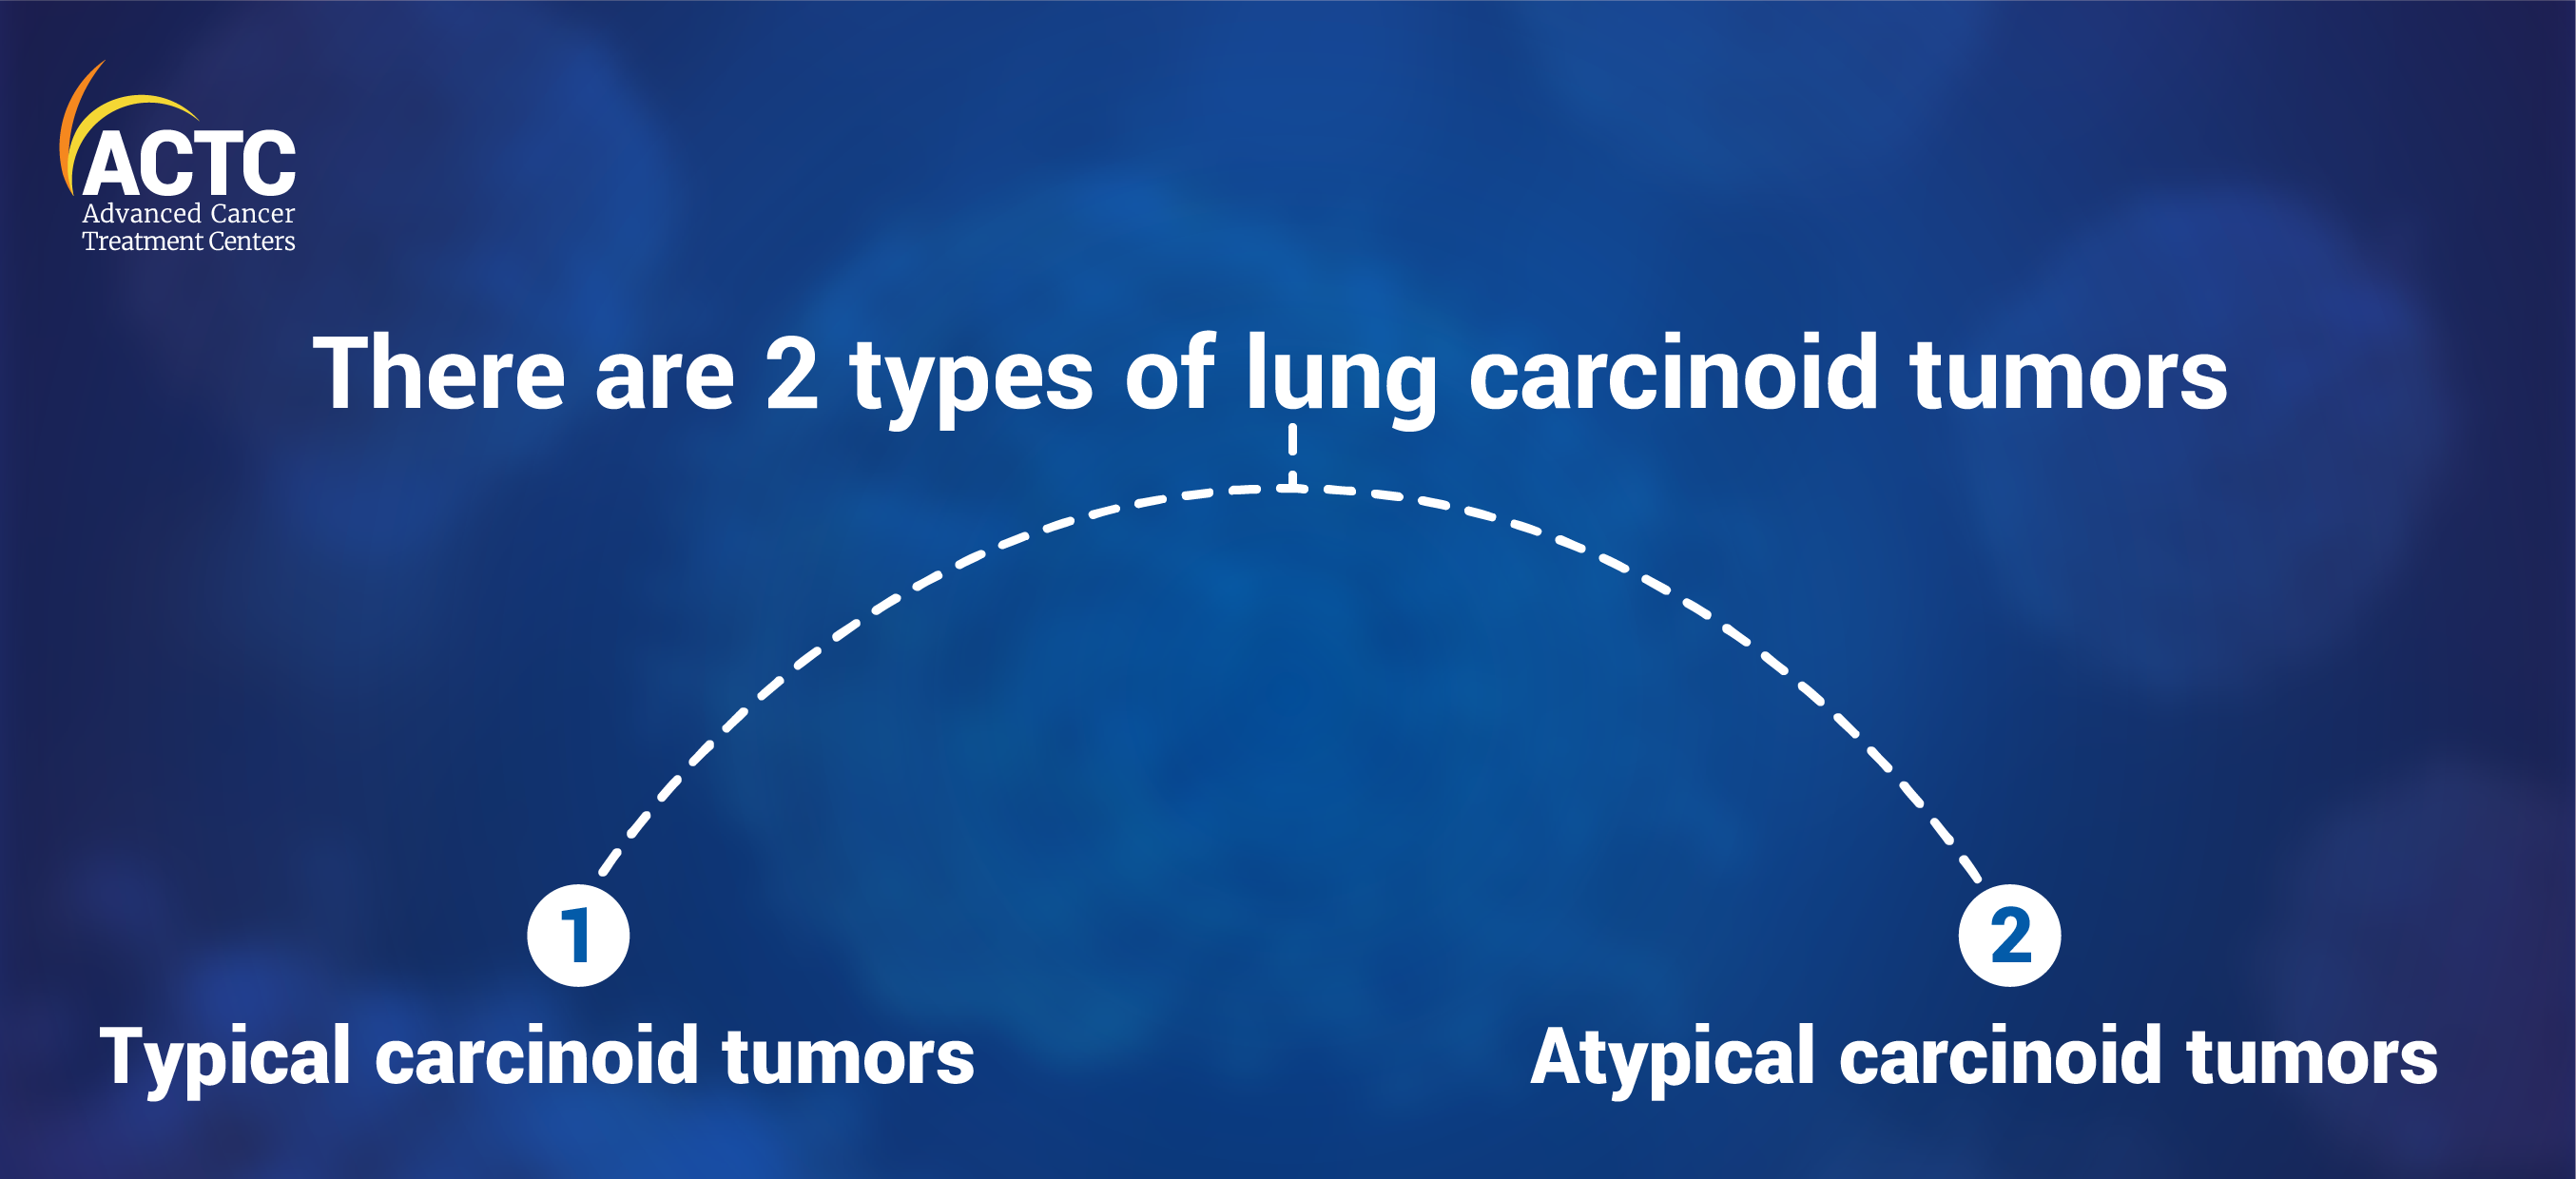 There are two types of lung carcinoid tumors